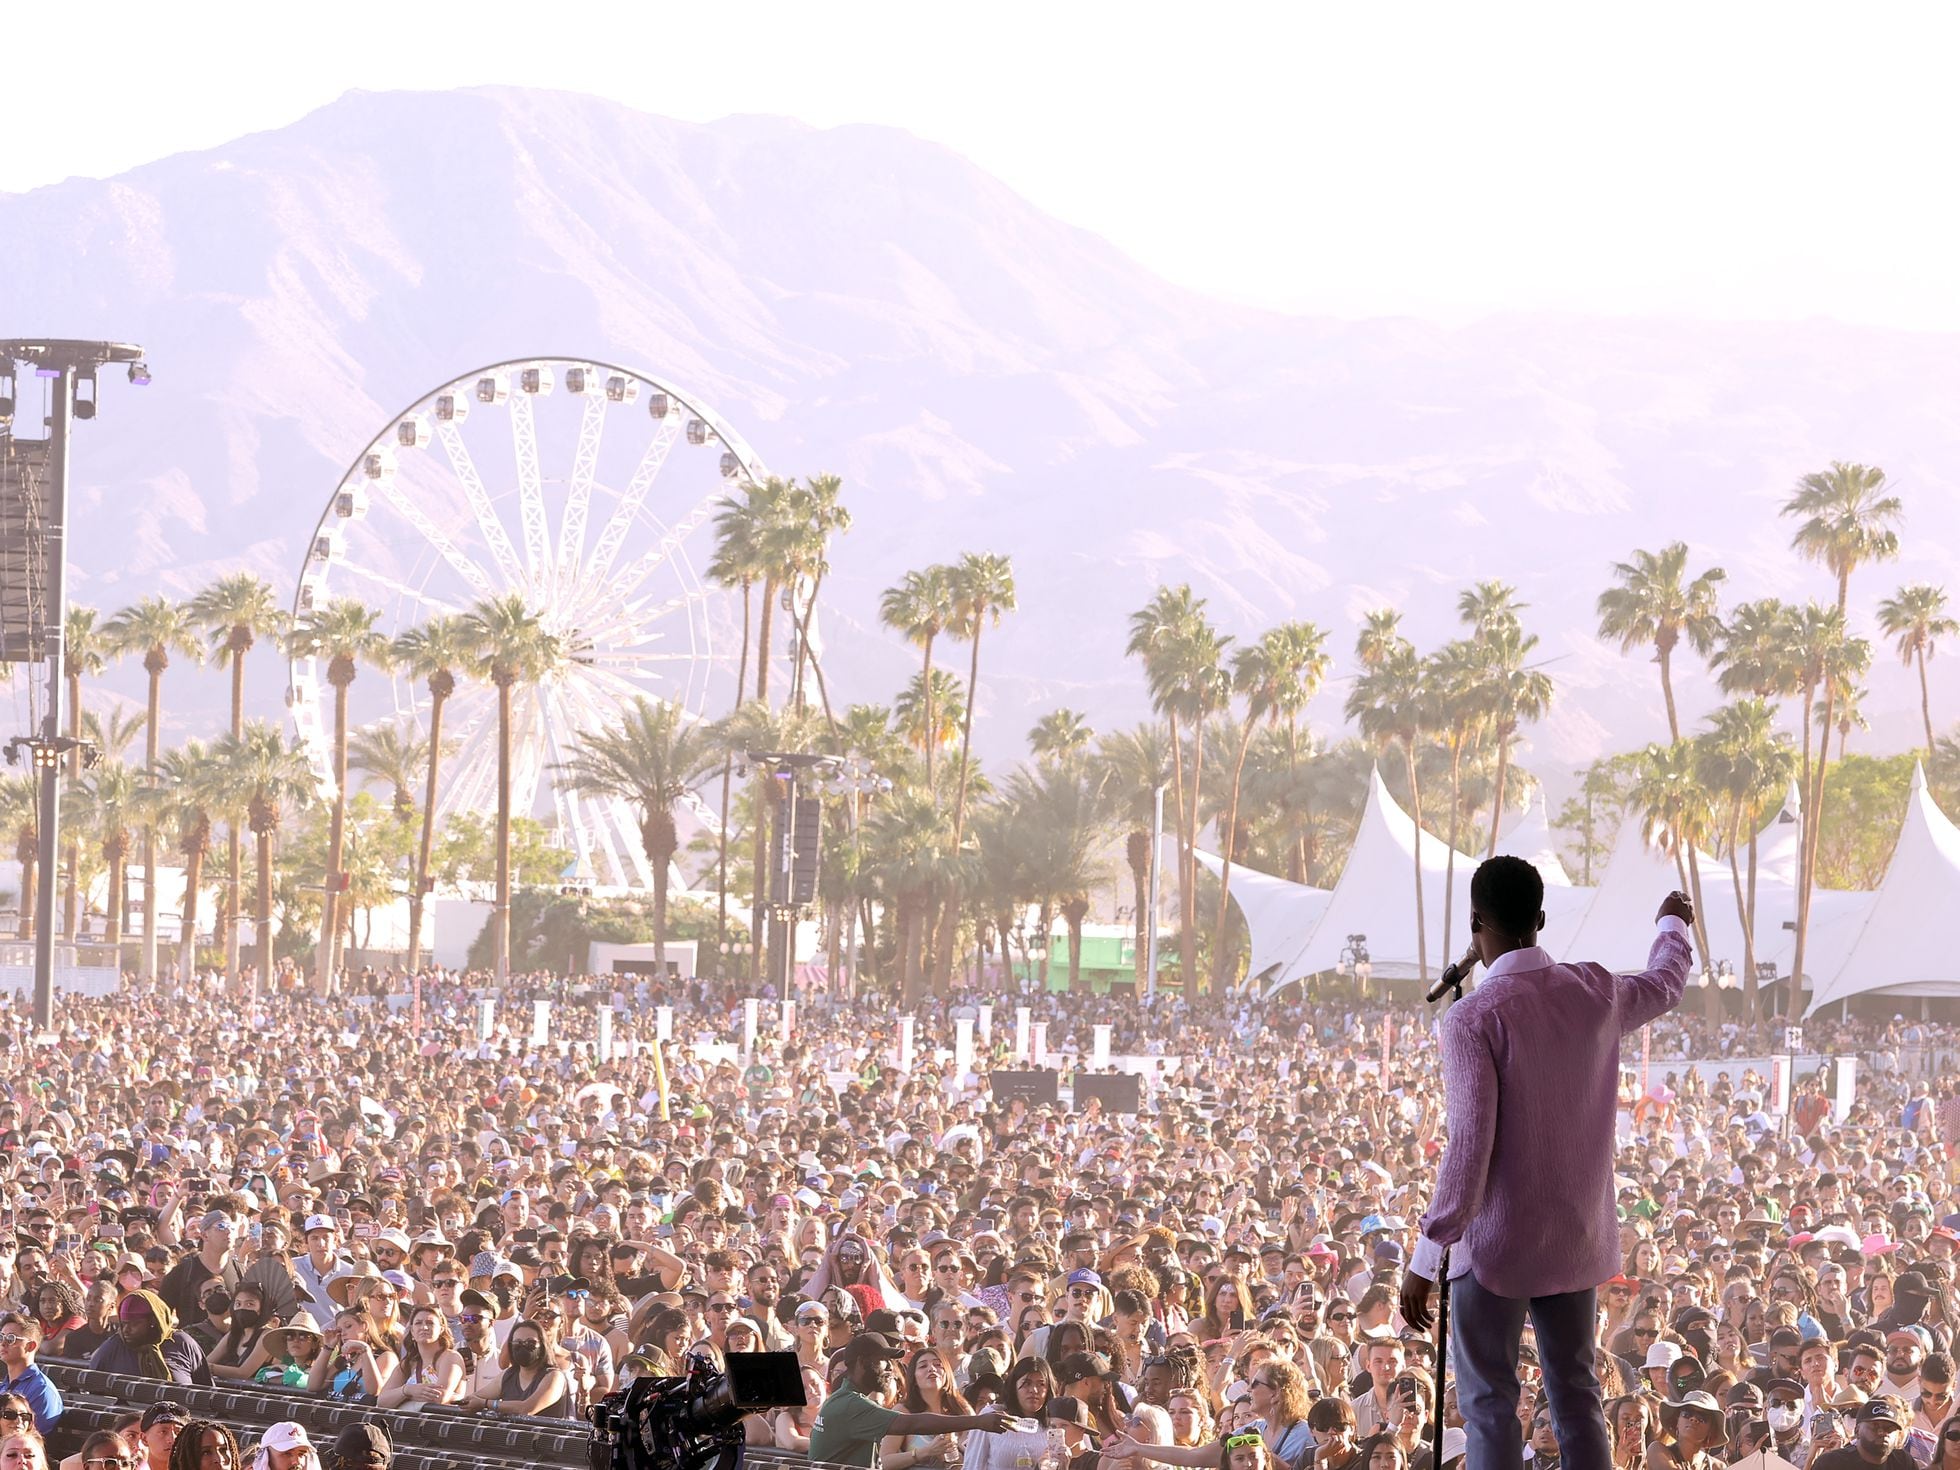 Guide to Coachella: festival lineup, schedules and how to get there |  Culture | EL PAÍS English